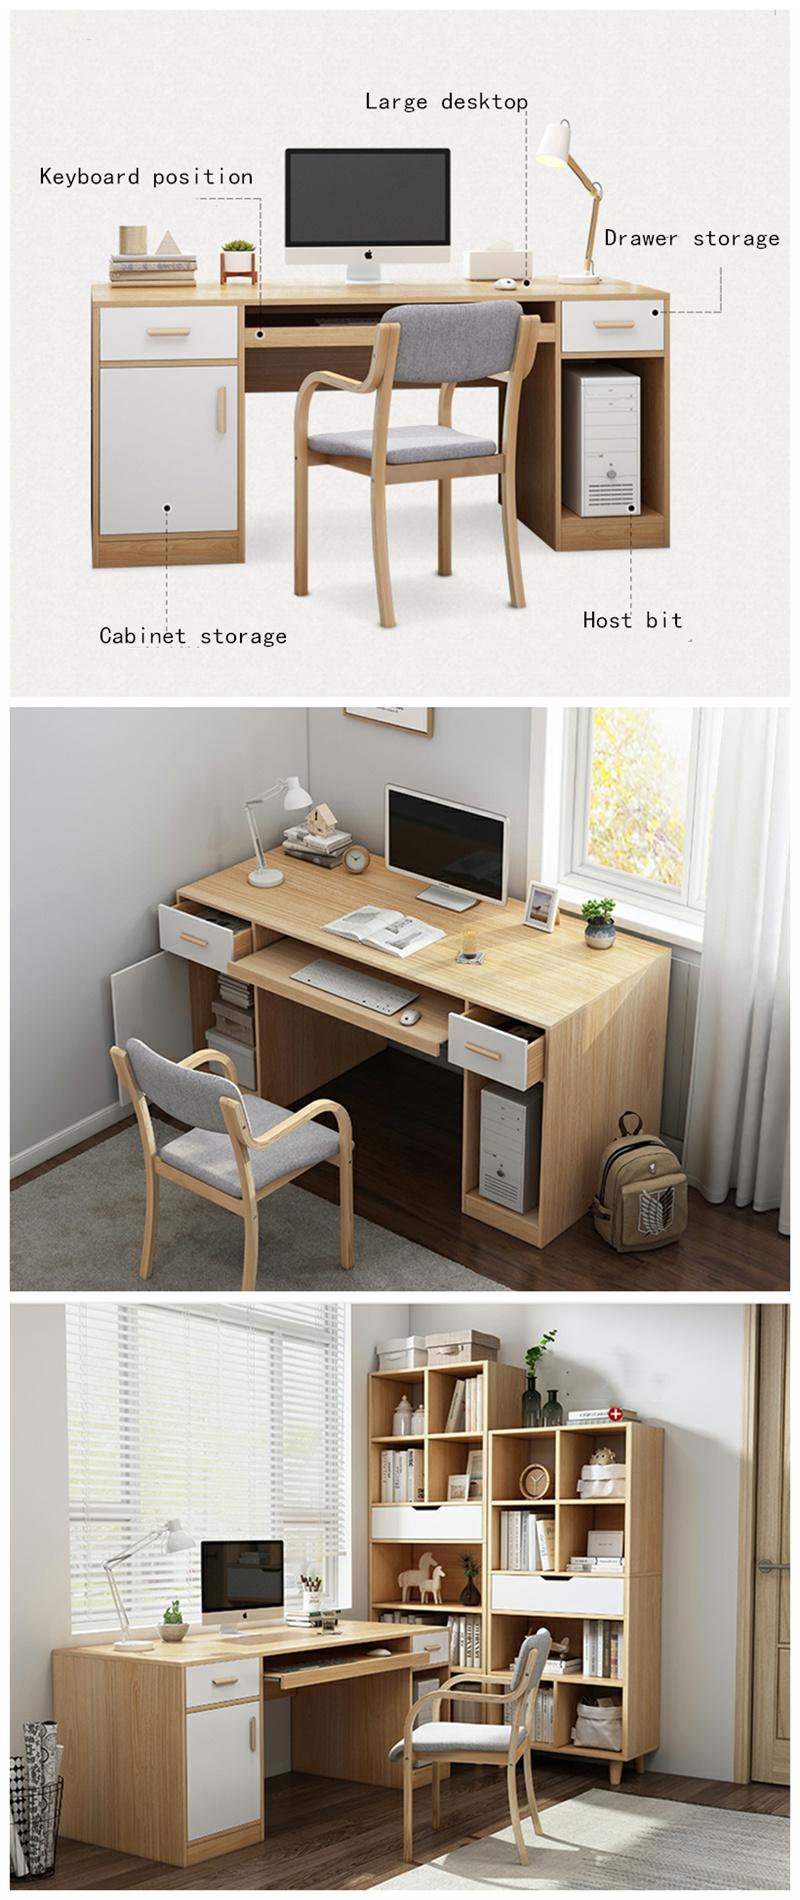 Modern Wooden Office School Furniture Folding Laptop Conference Computer Study Desk Executive Office Table